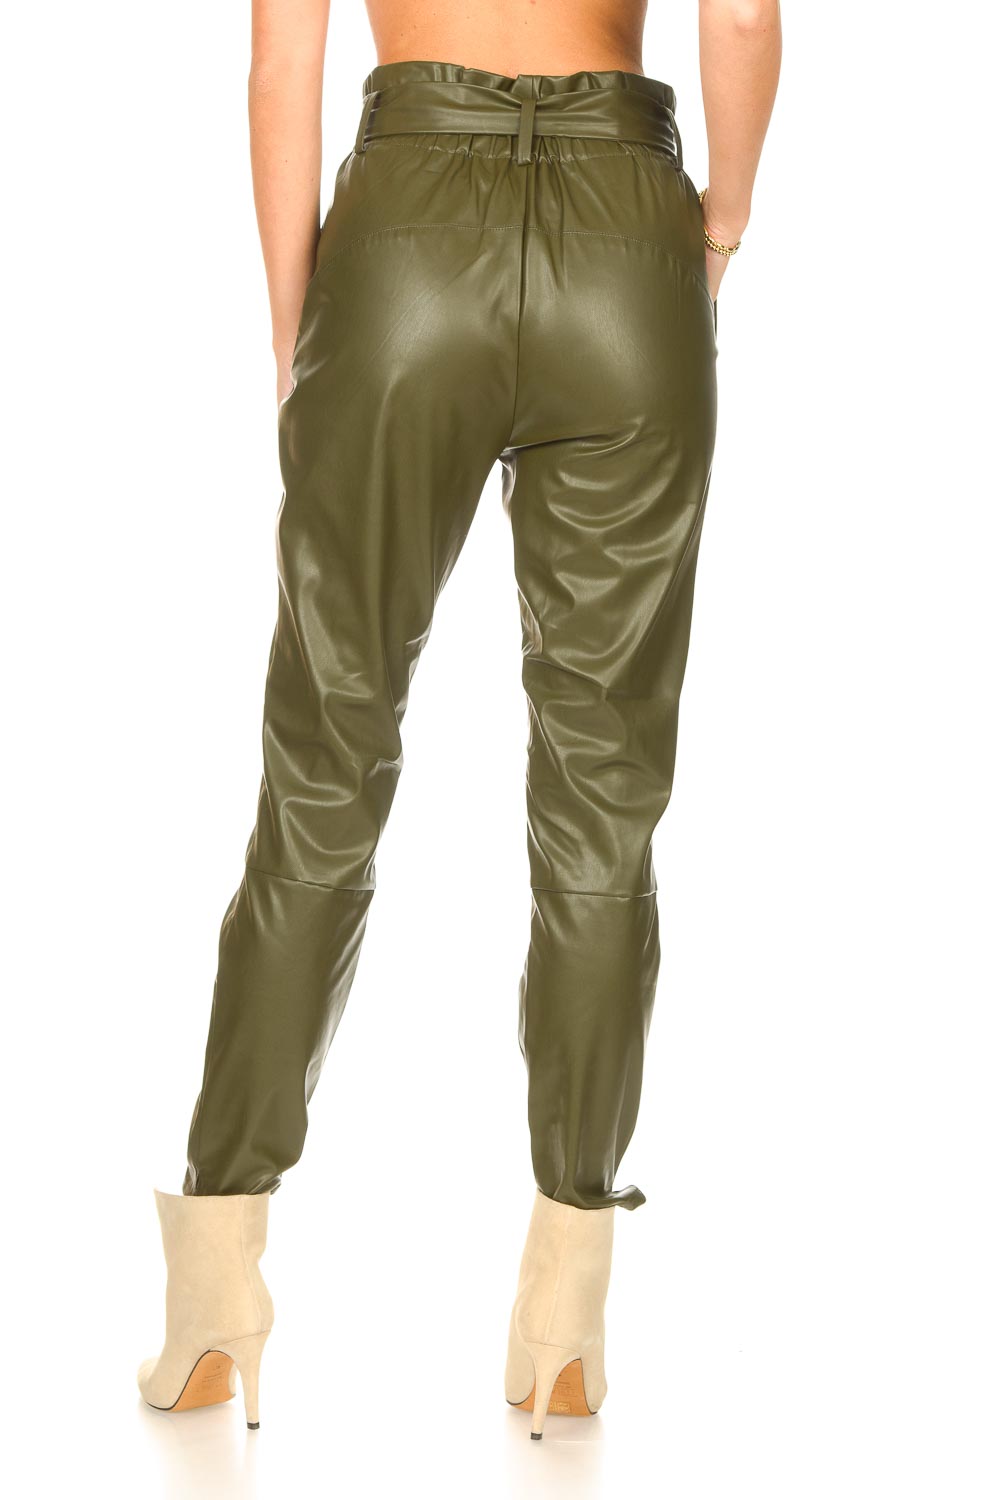 Details more than 80 army green leather pants super hot - in.eteachers